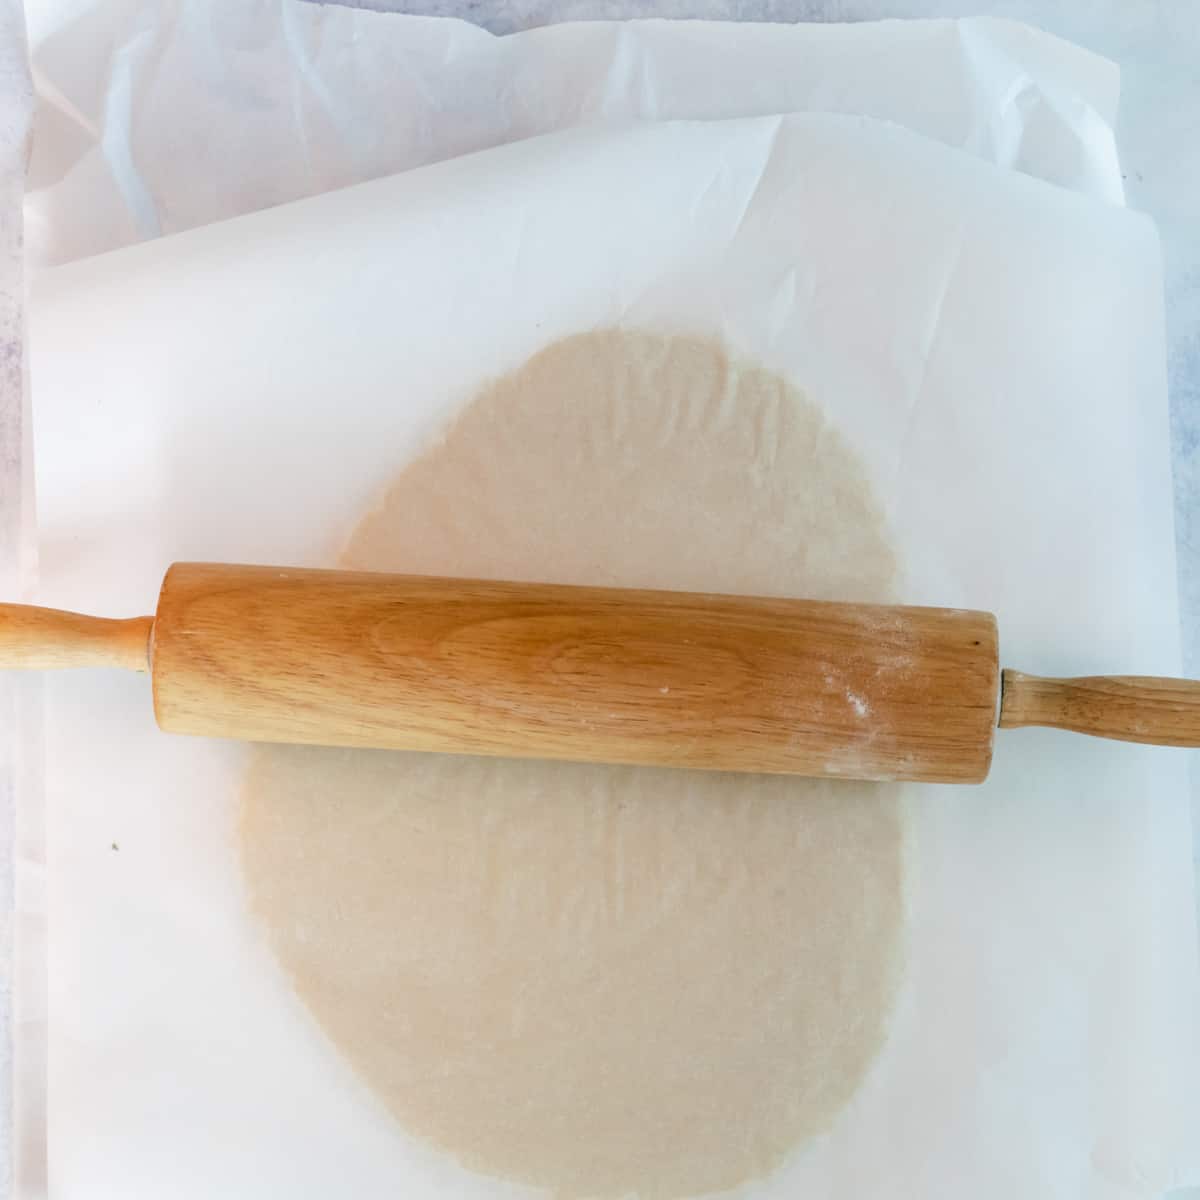 Sugar cookie dough rolled between parchment paper with a wooden rolling pin.